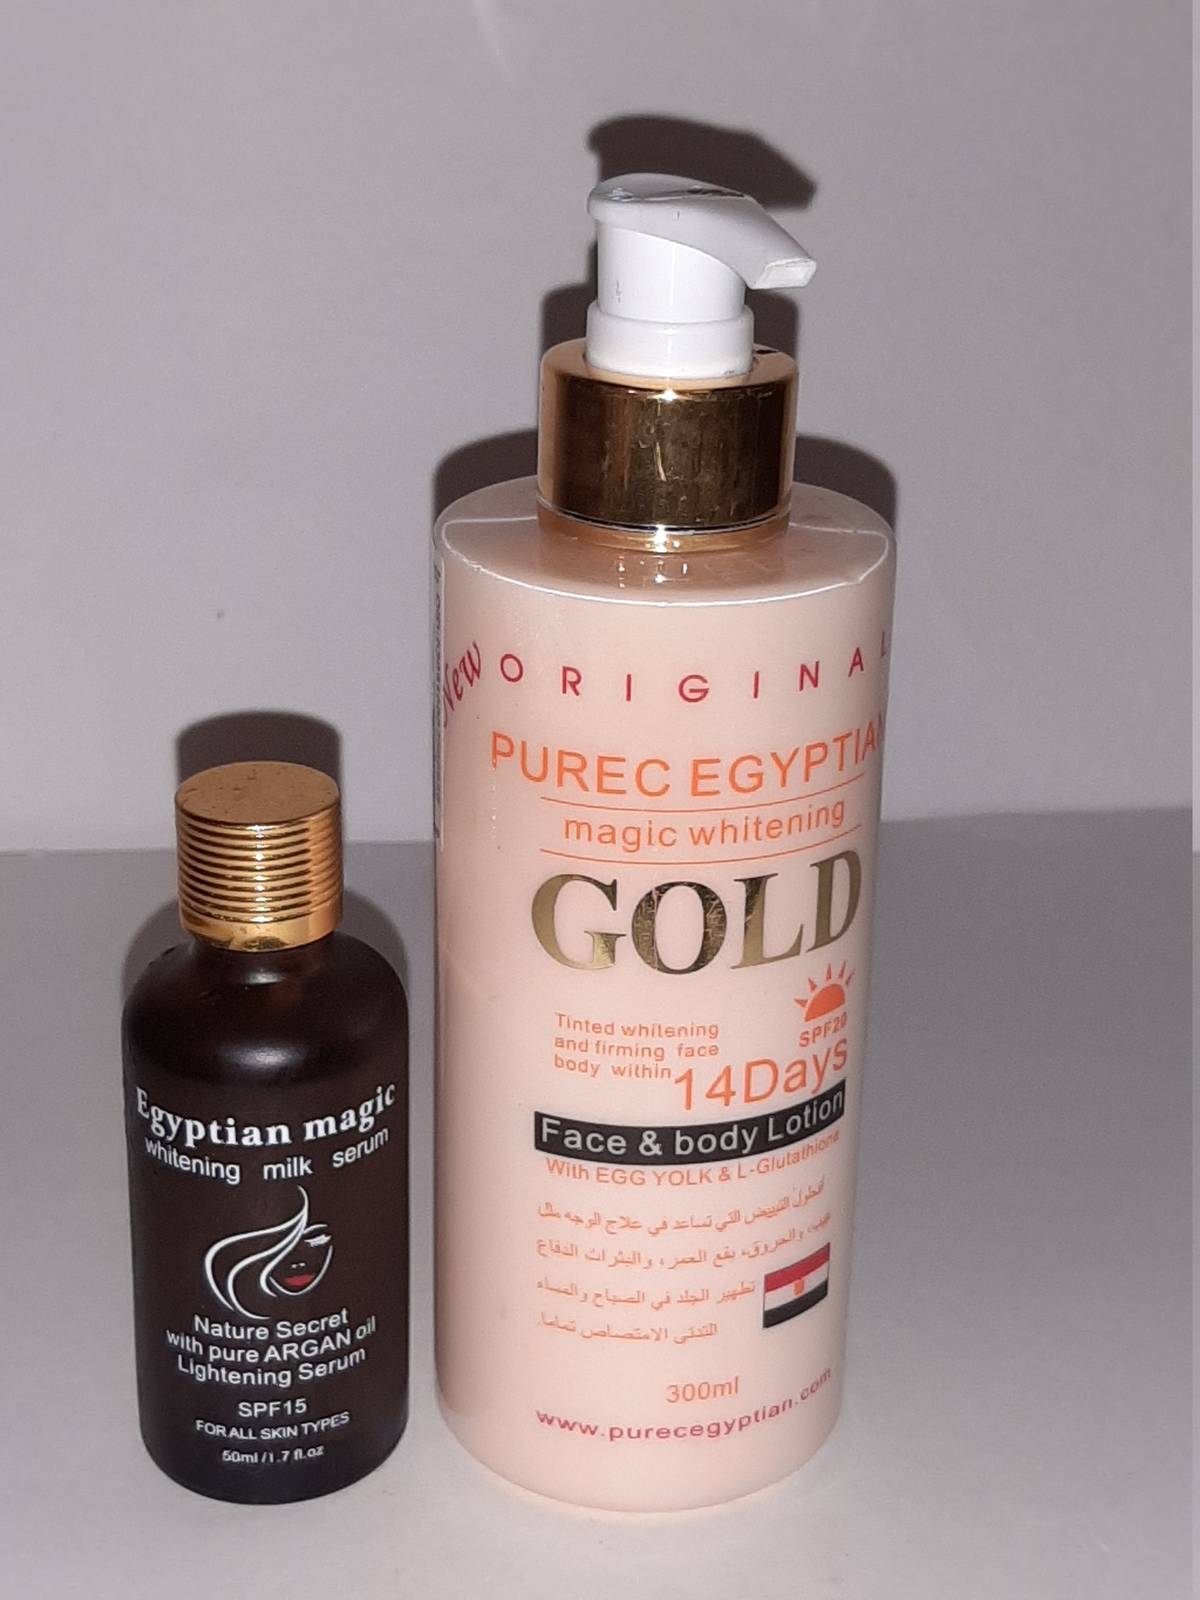 Purec - Pure egyptian gold whitening face & body lotion with egyptian whitening m